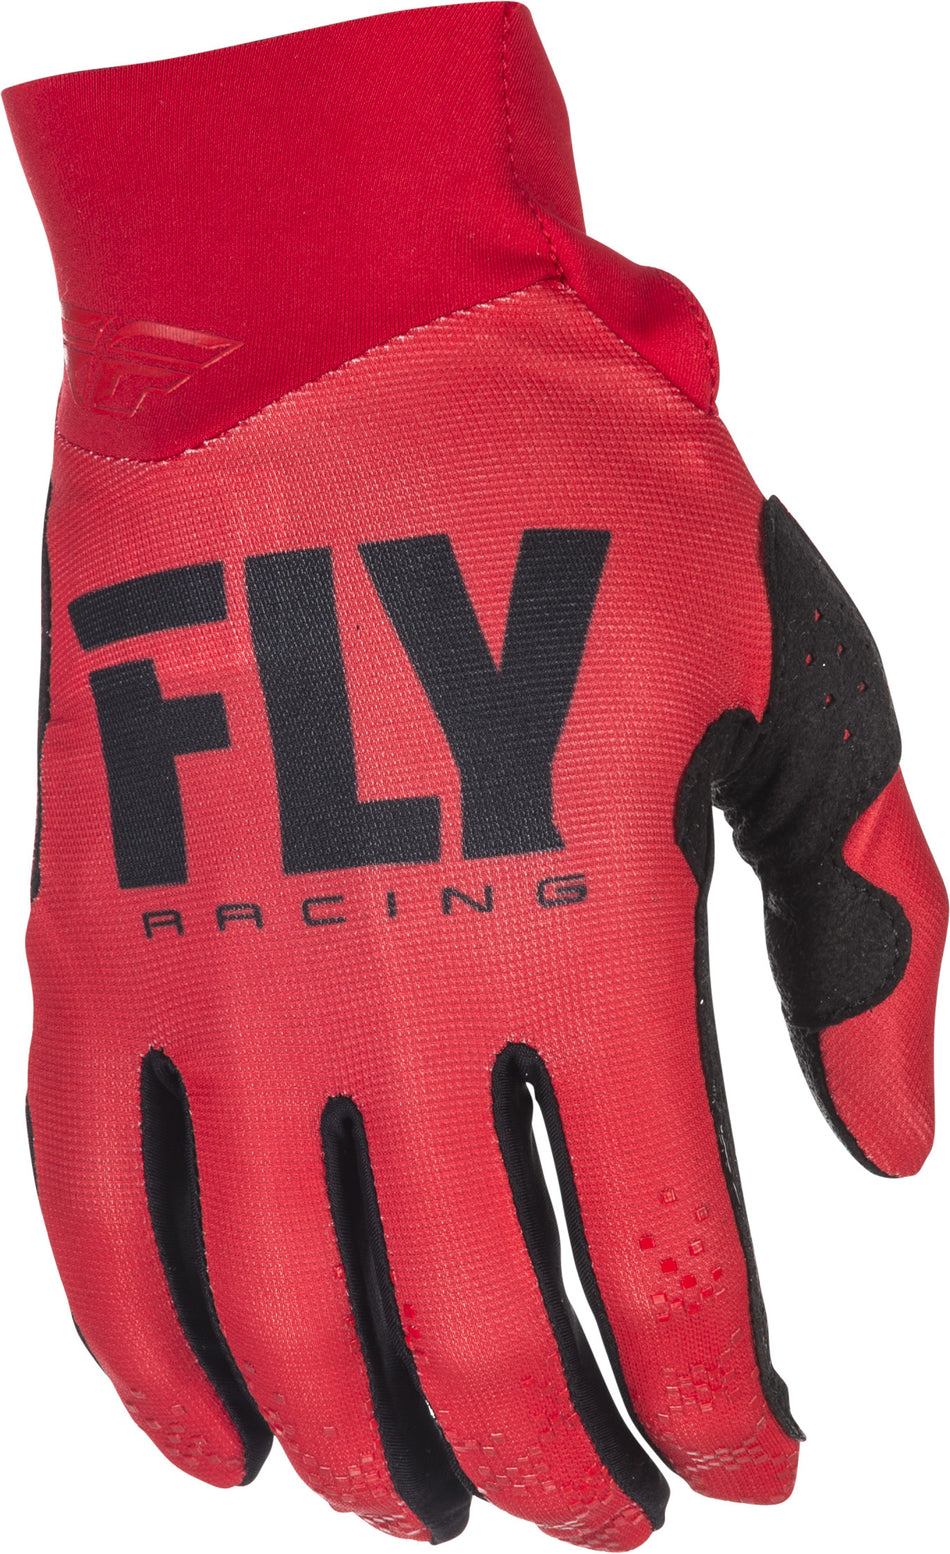 FLY RACING Pro Lite Gloves Red Sz 7 371-81207